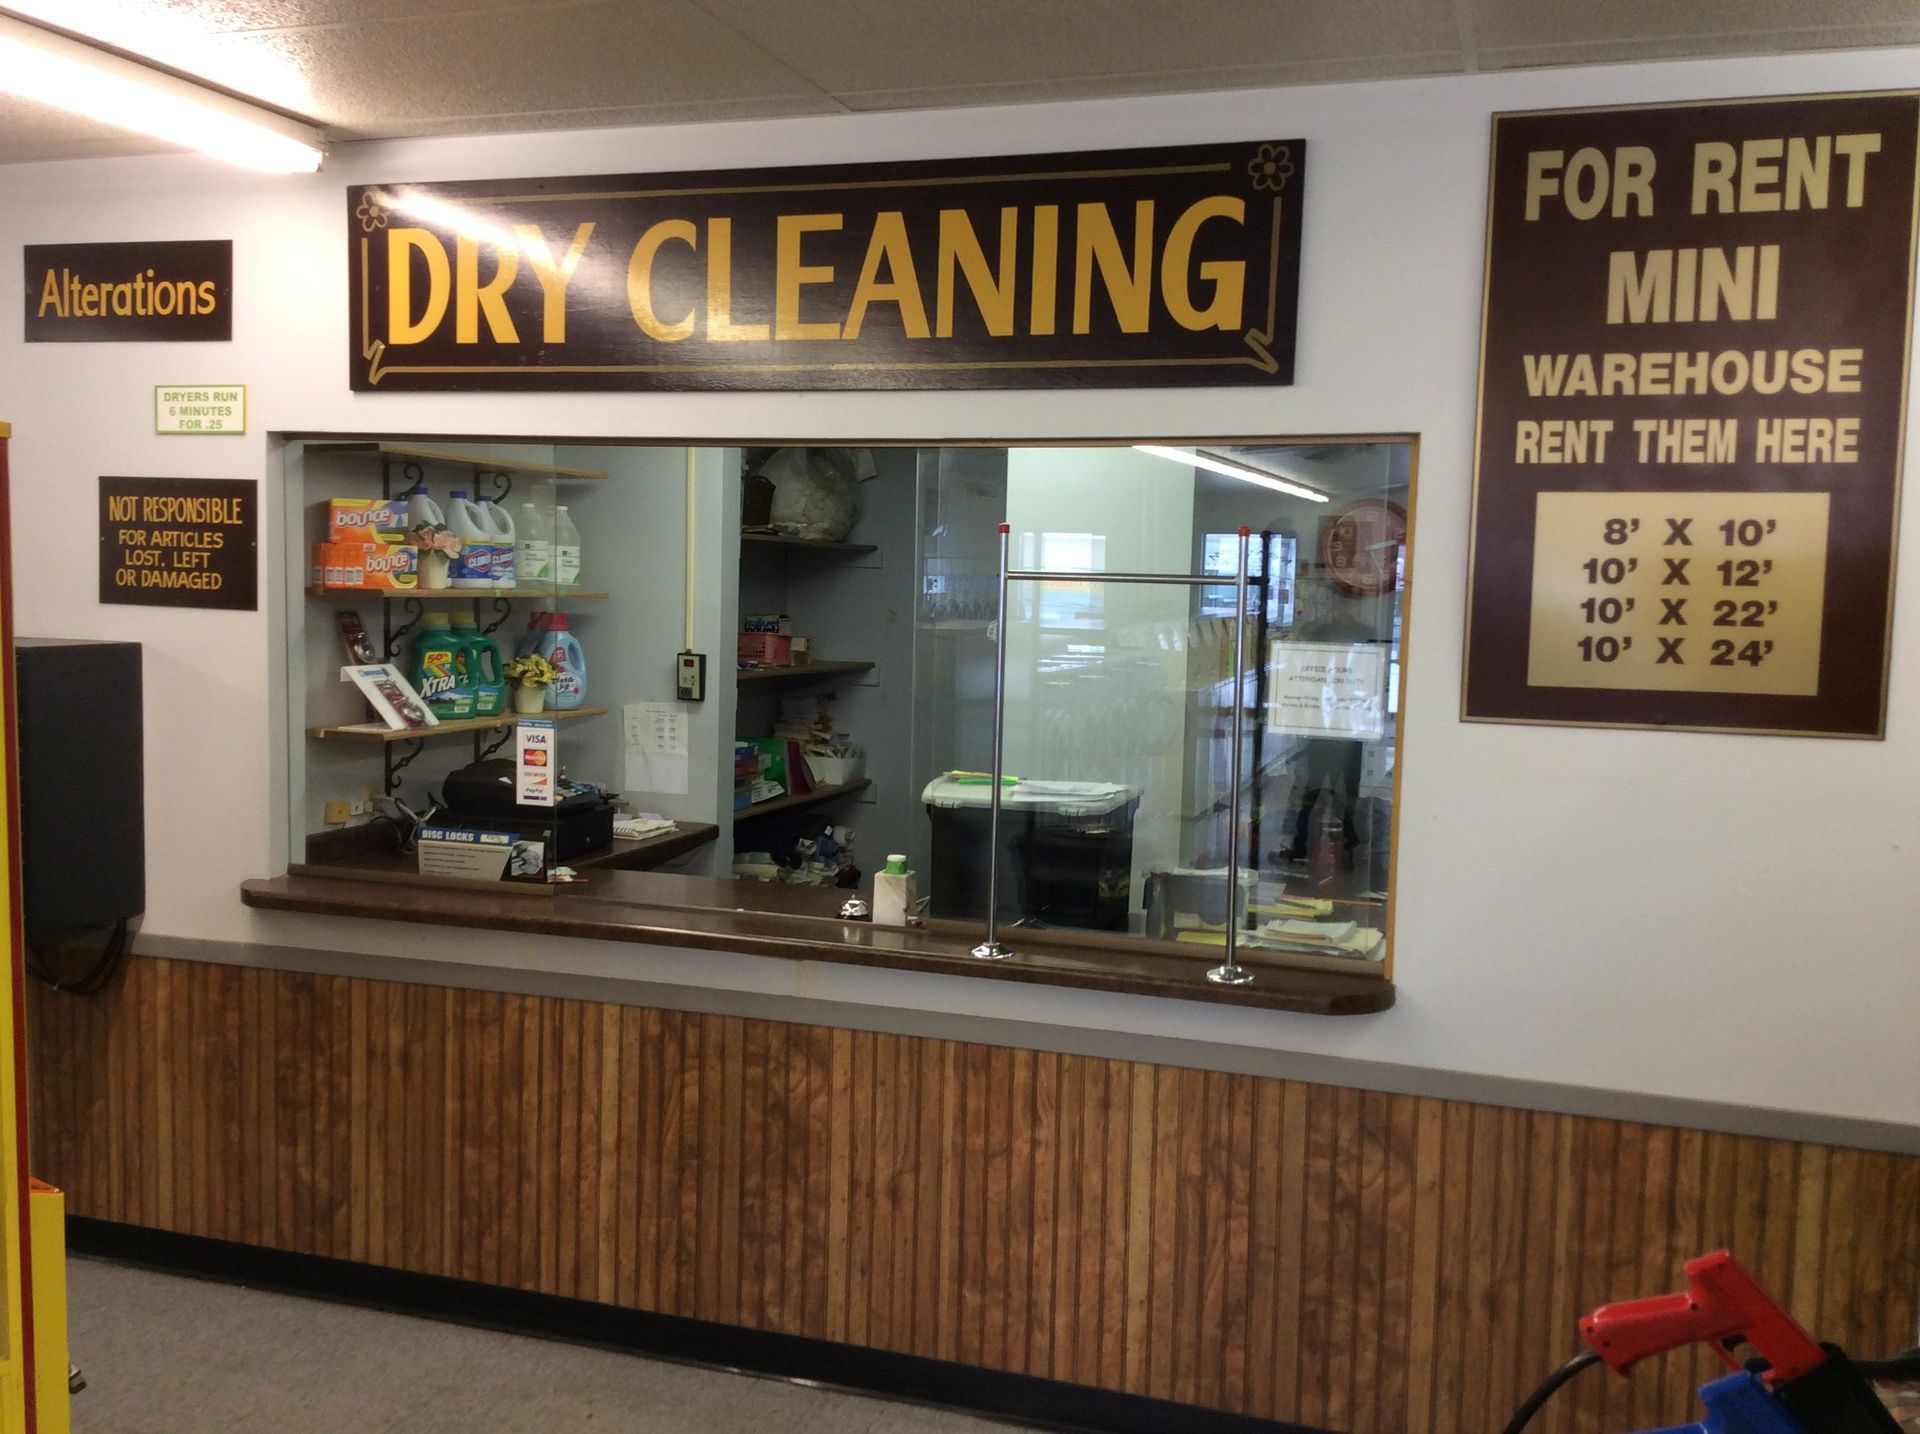 Dry cleaning